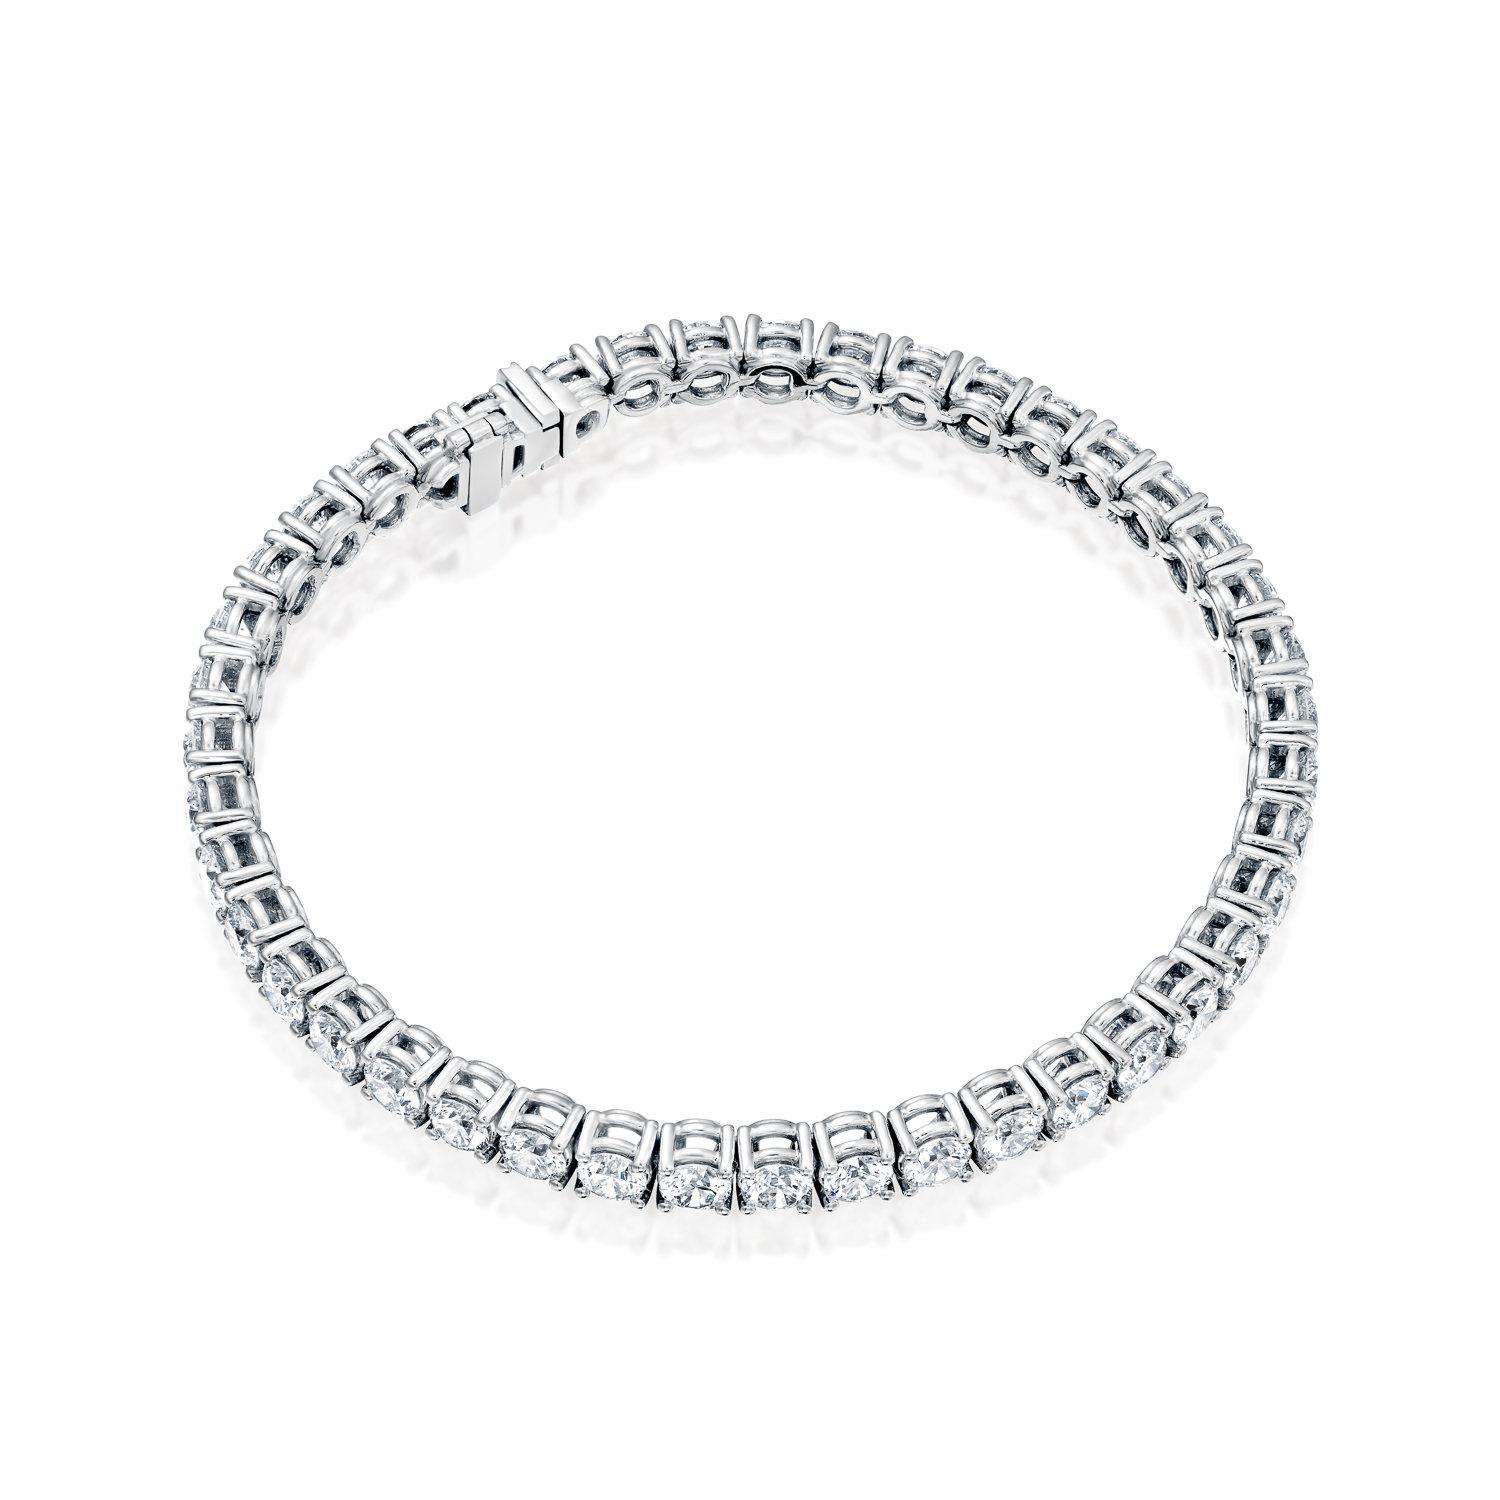 A beautiful large and classic diamond bracelet made of 14K White Gold set with 43 Diamonds. The total carat weight of this beautiful Diamond bracelet is 9.15 carat.
 
Metal Type: 
This bracelet can be made in yellow gold, white gold or rose gold